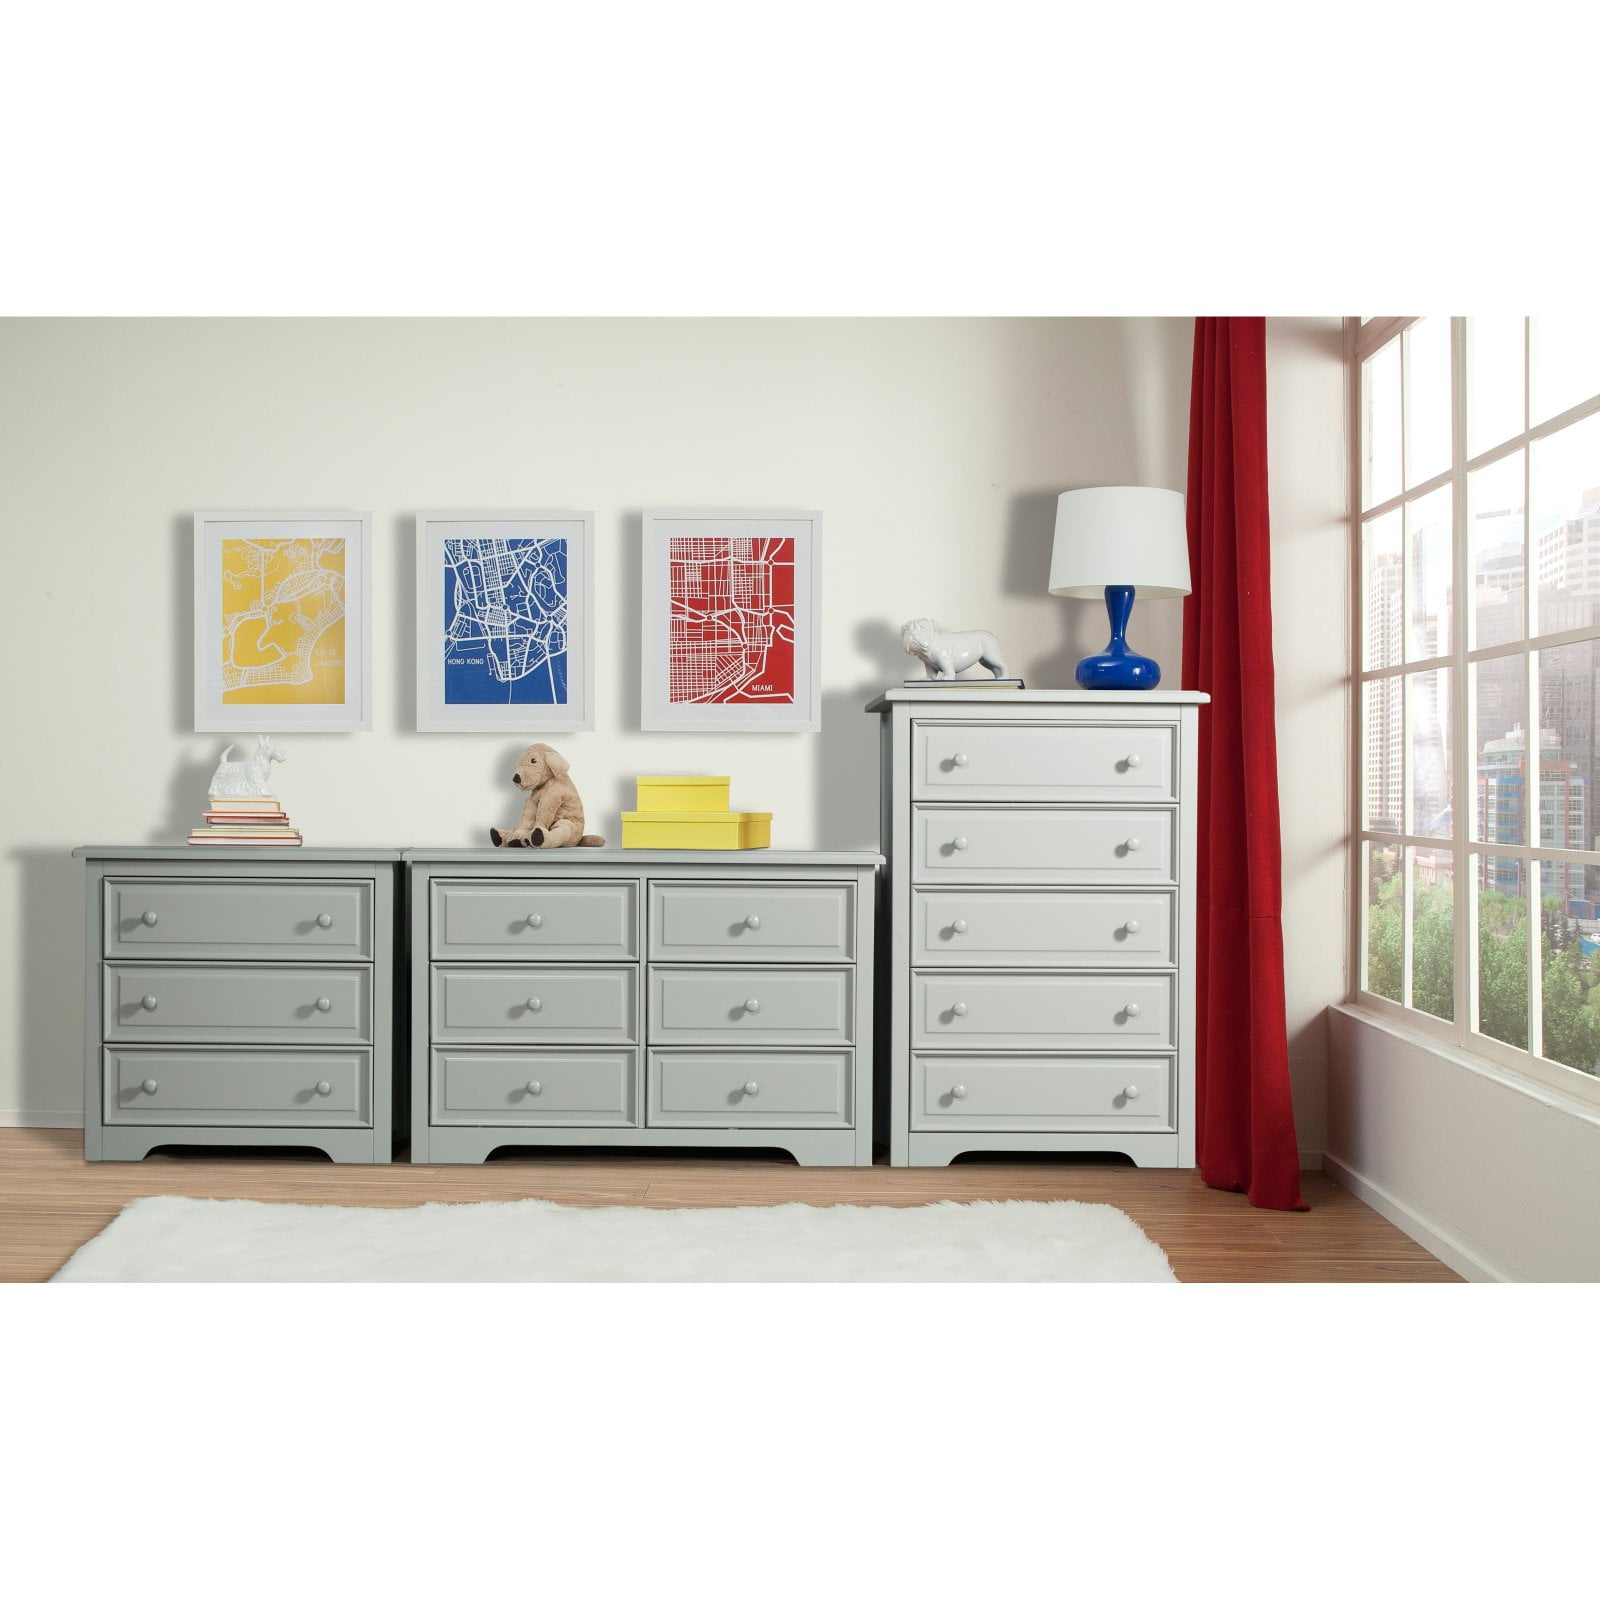 Suite Bebe Brooklyn 6 Drawer Double Dresser White 